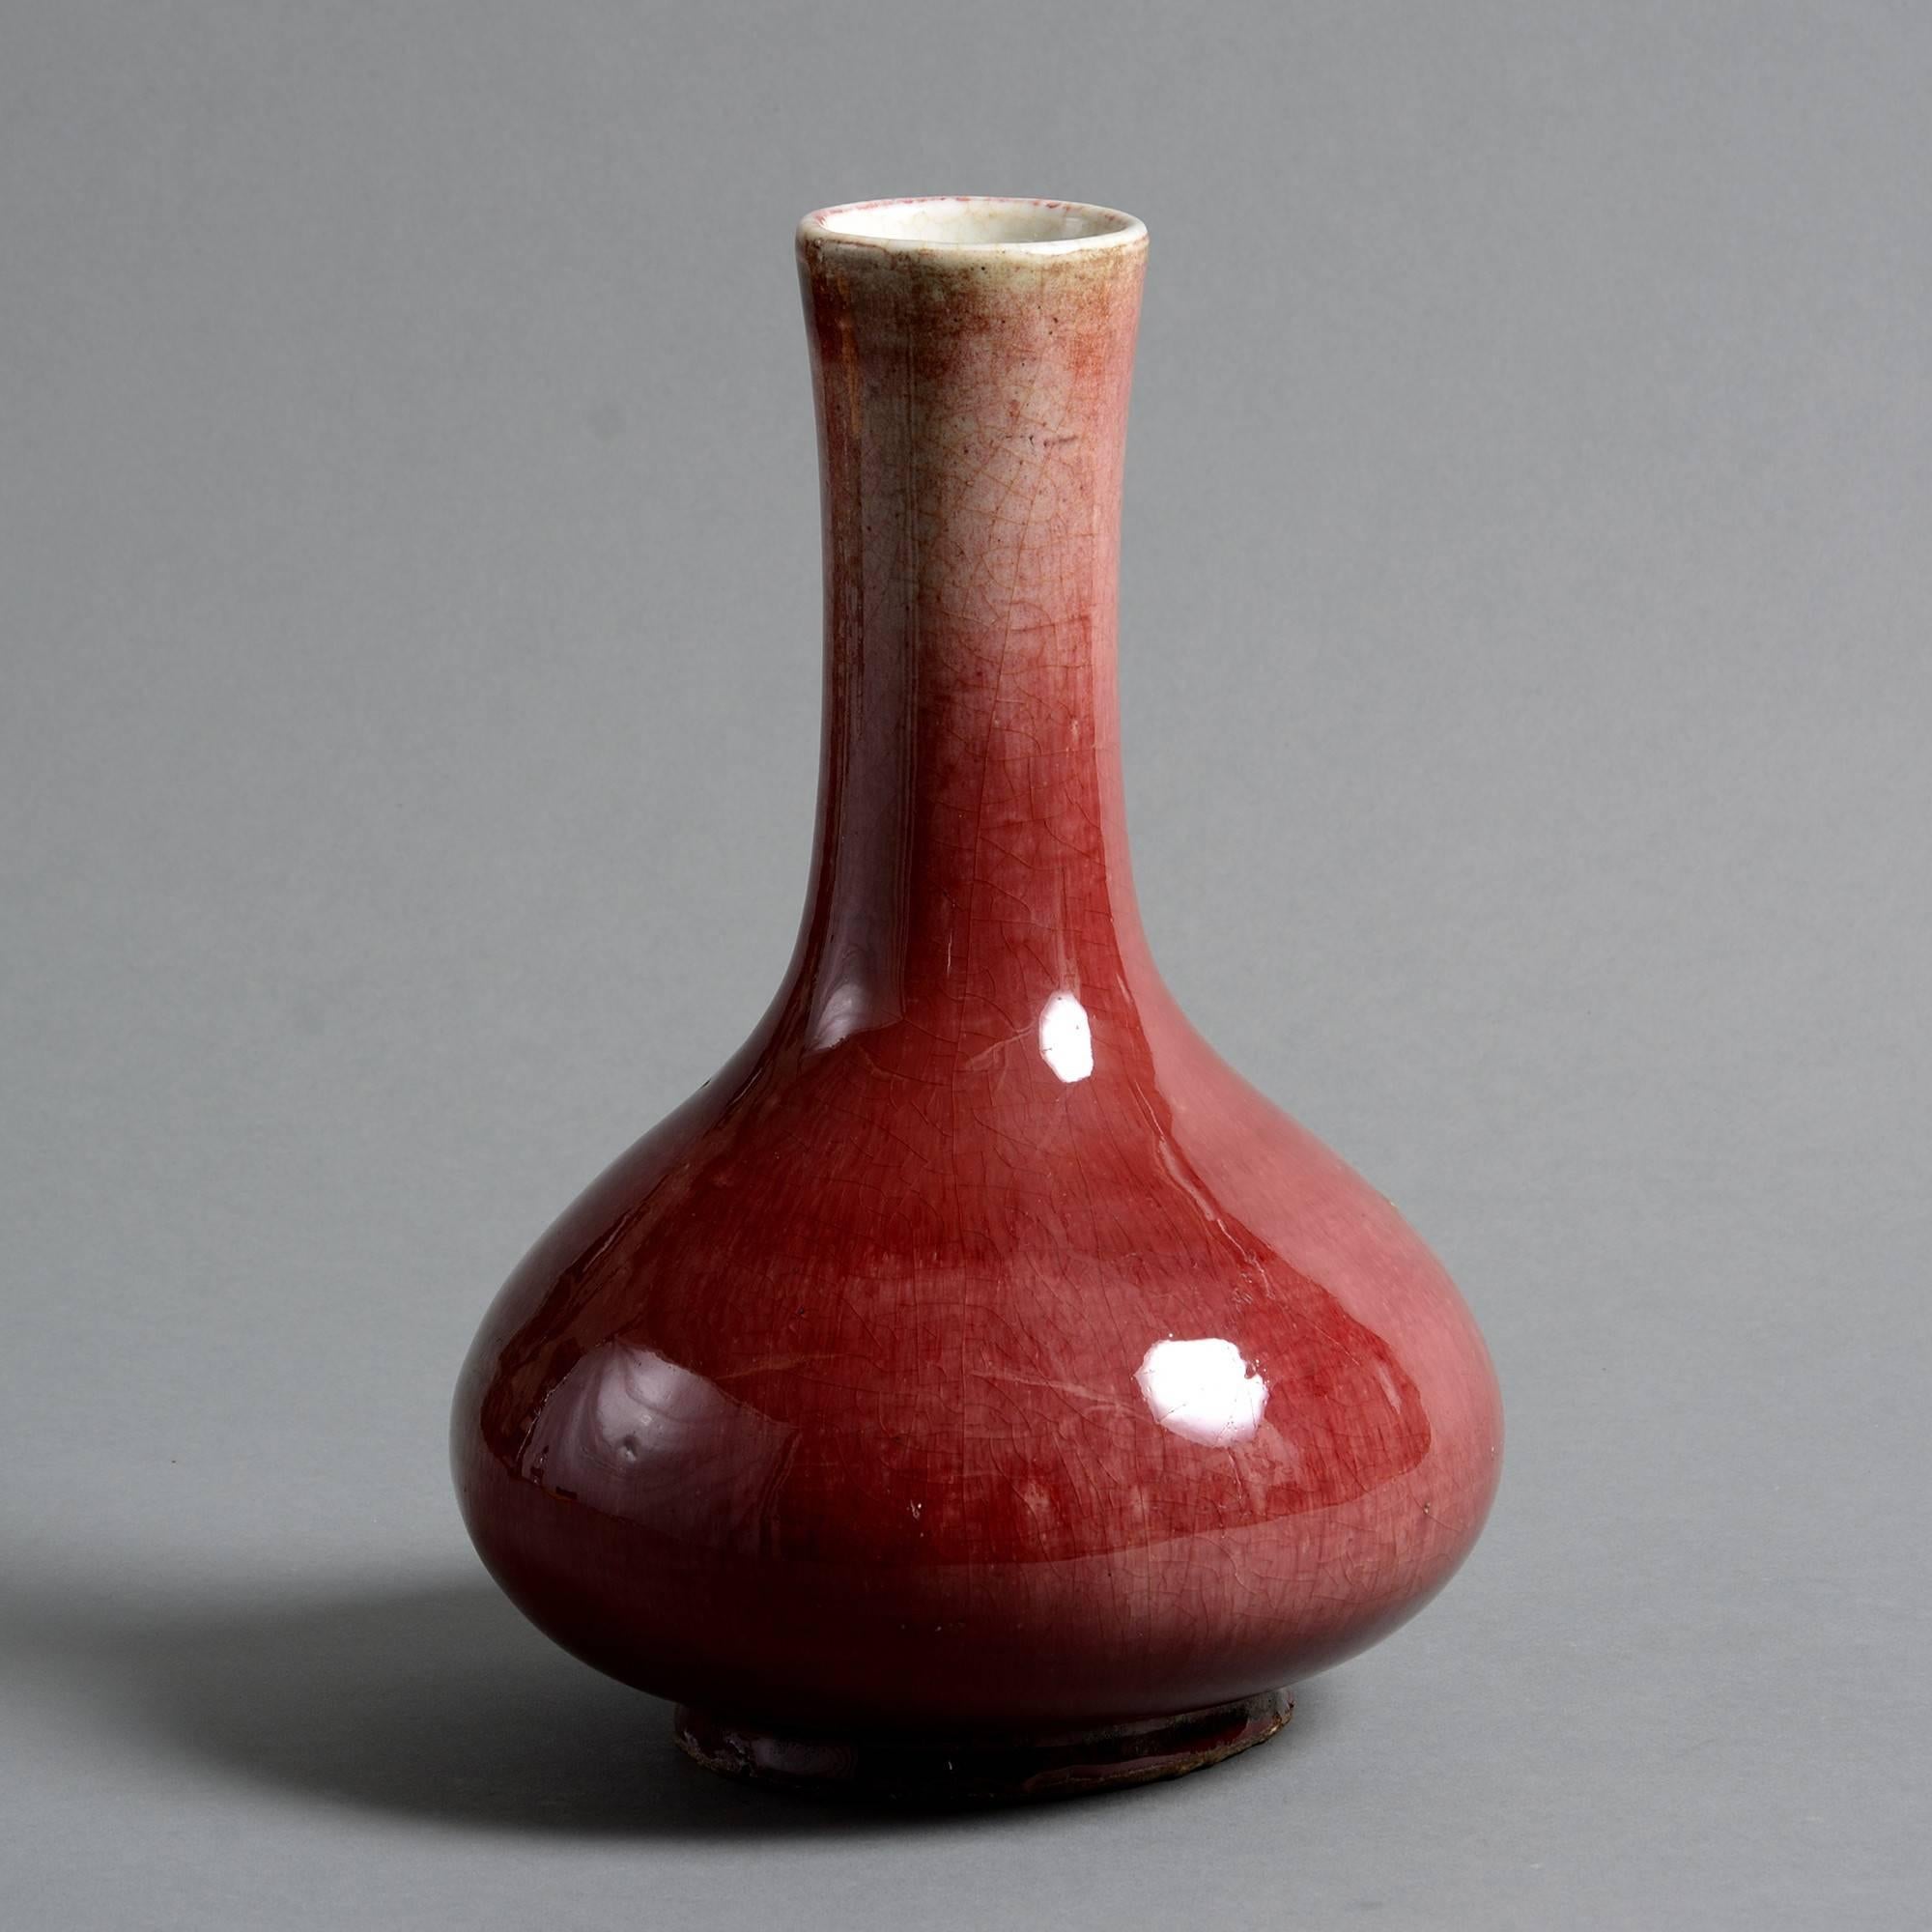 An early 19th century sang de boeuf porcelain bottle vase. 

Qing dynasty, Jiaqing period.